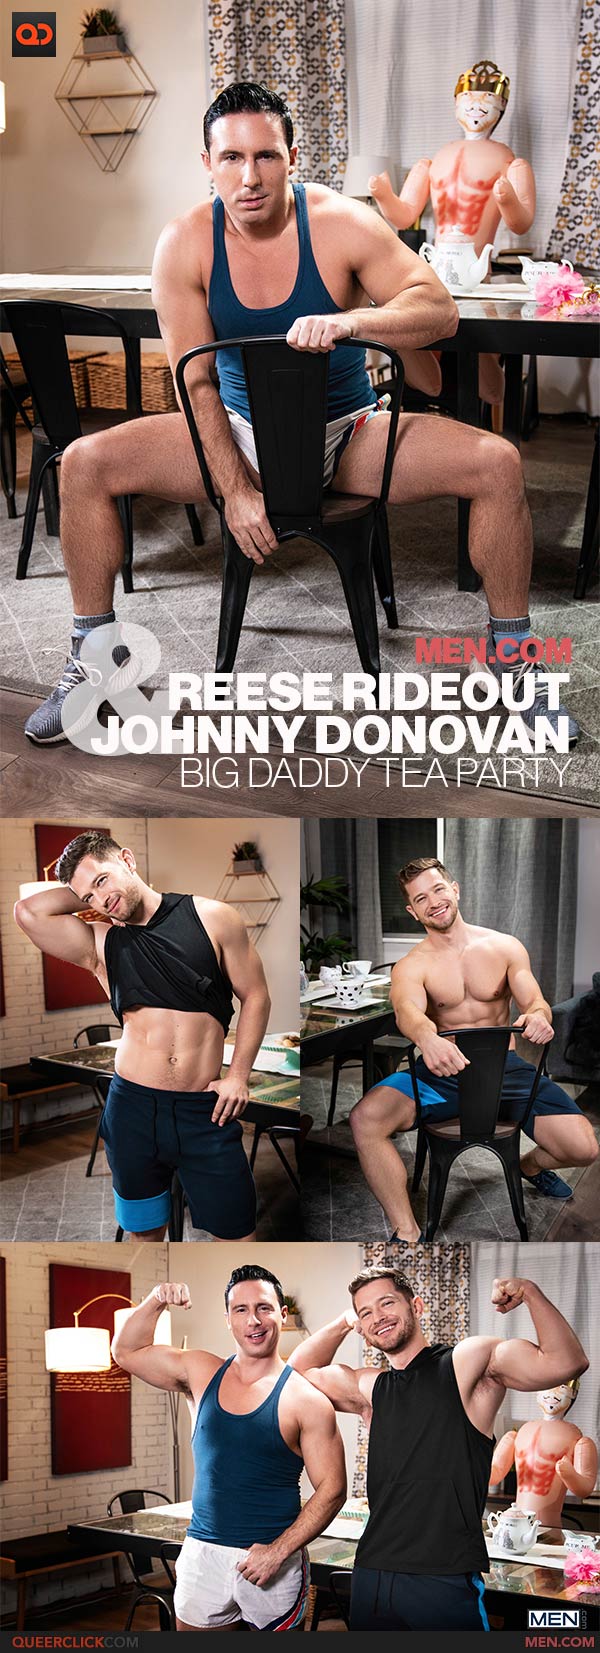 Men.com: Reese Rideout and Johnny Donovan